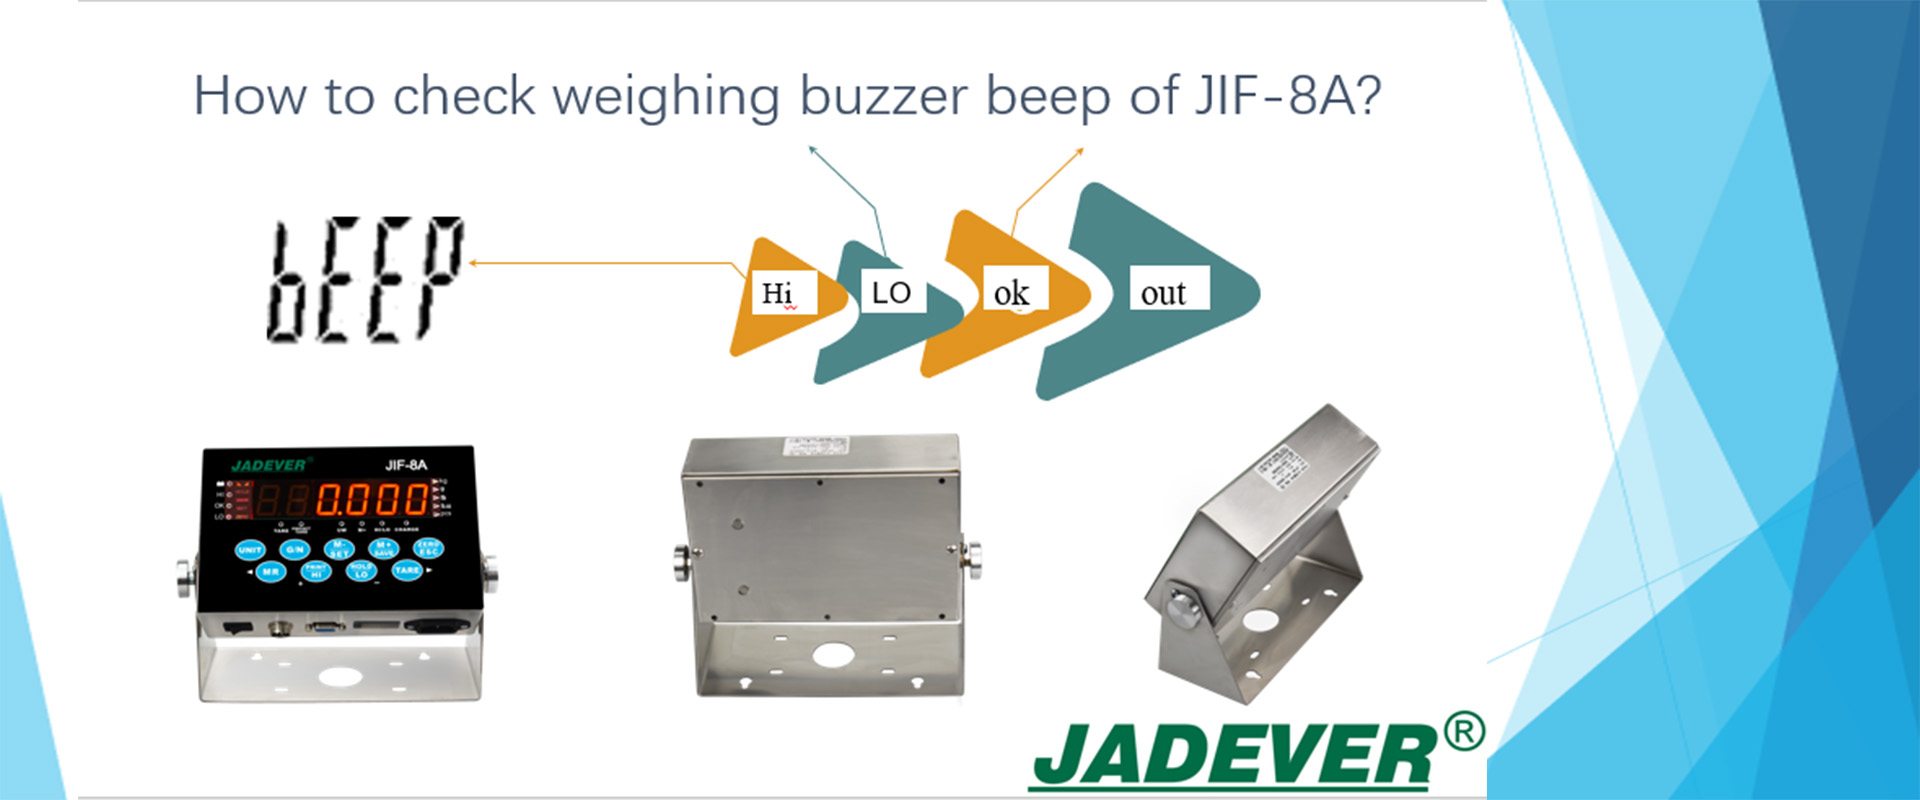 How to check weighing buzzer beep of JIF-8A?